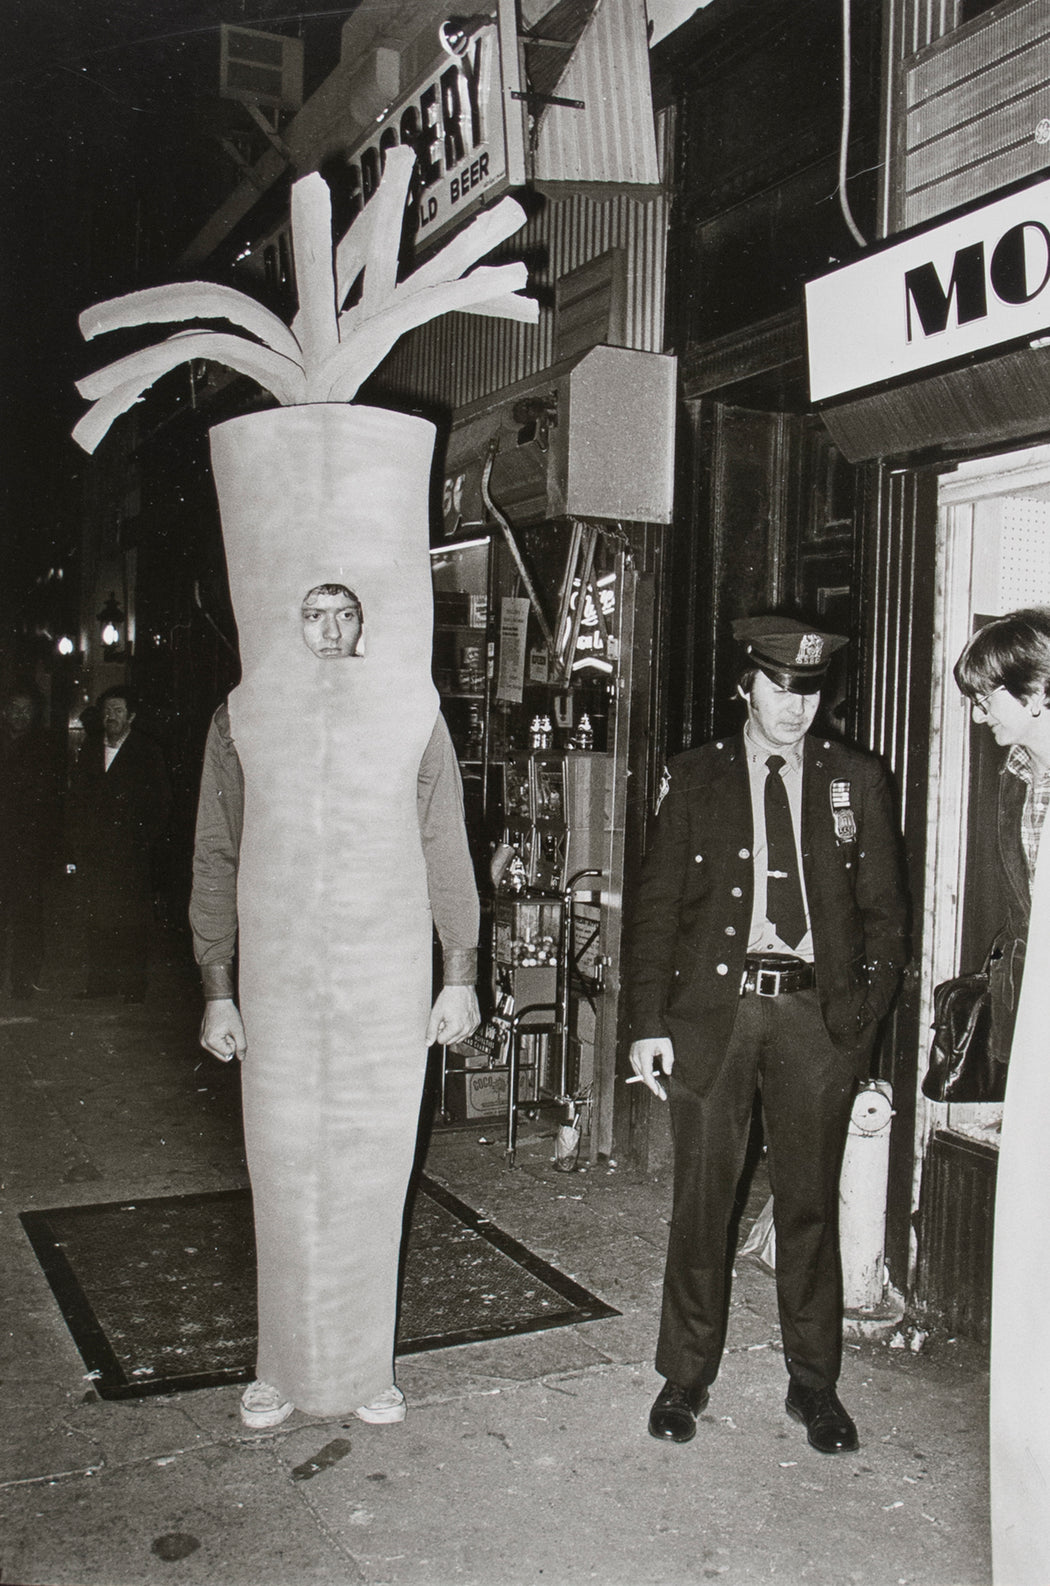 Untitled [Man in carrot costume with cop]